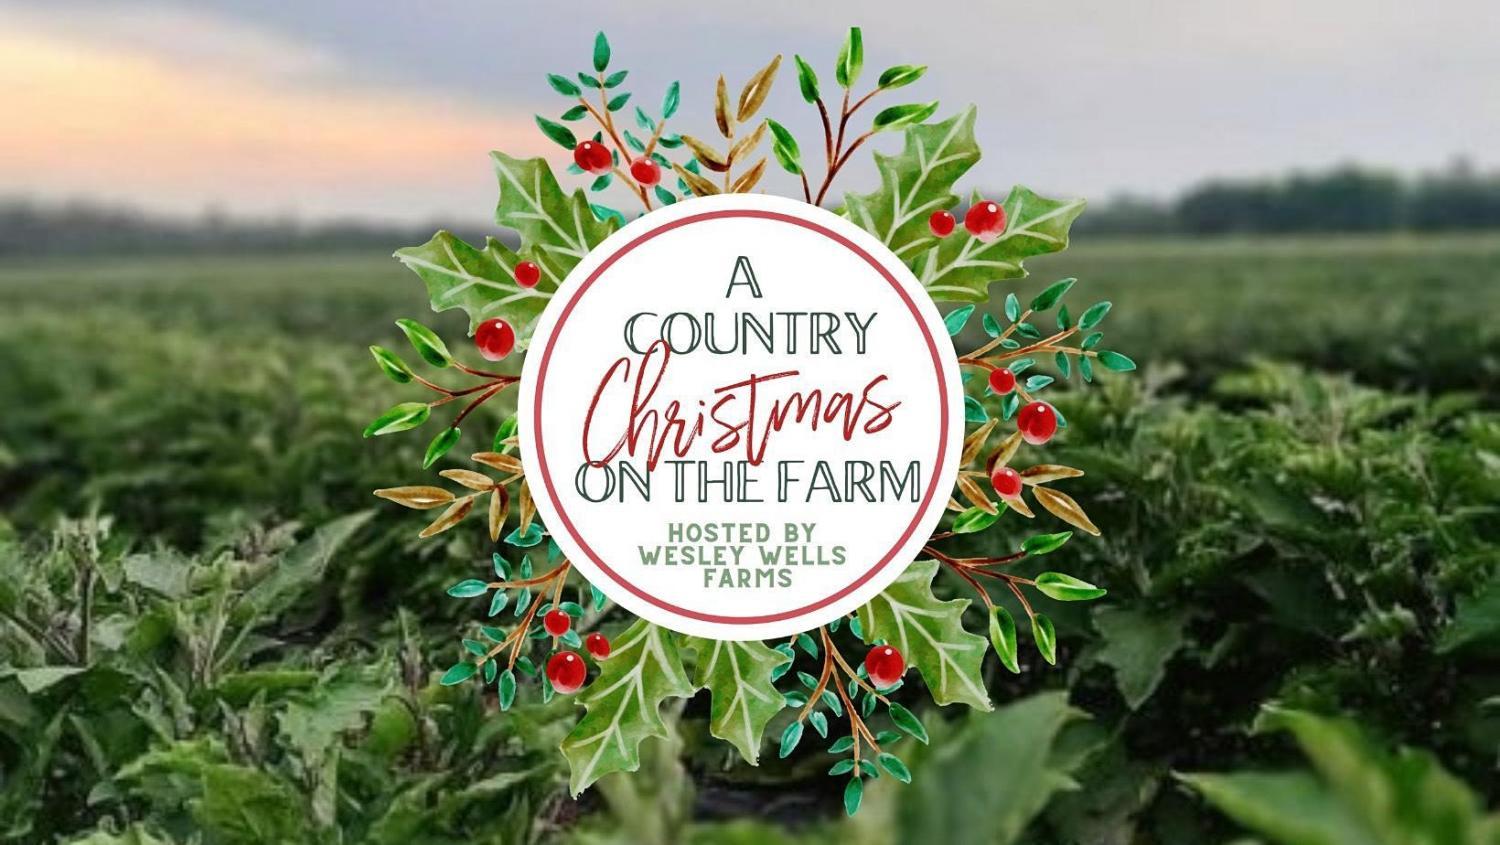 A Country Christmas on the Farm at Jacksonville